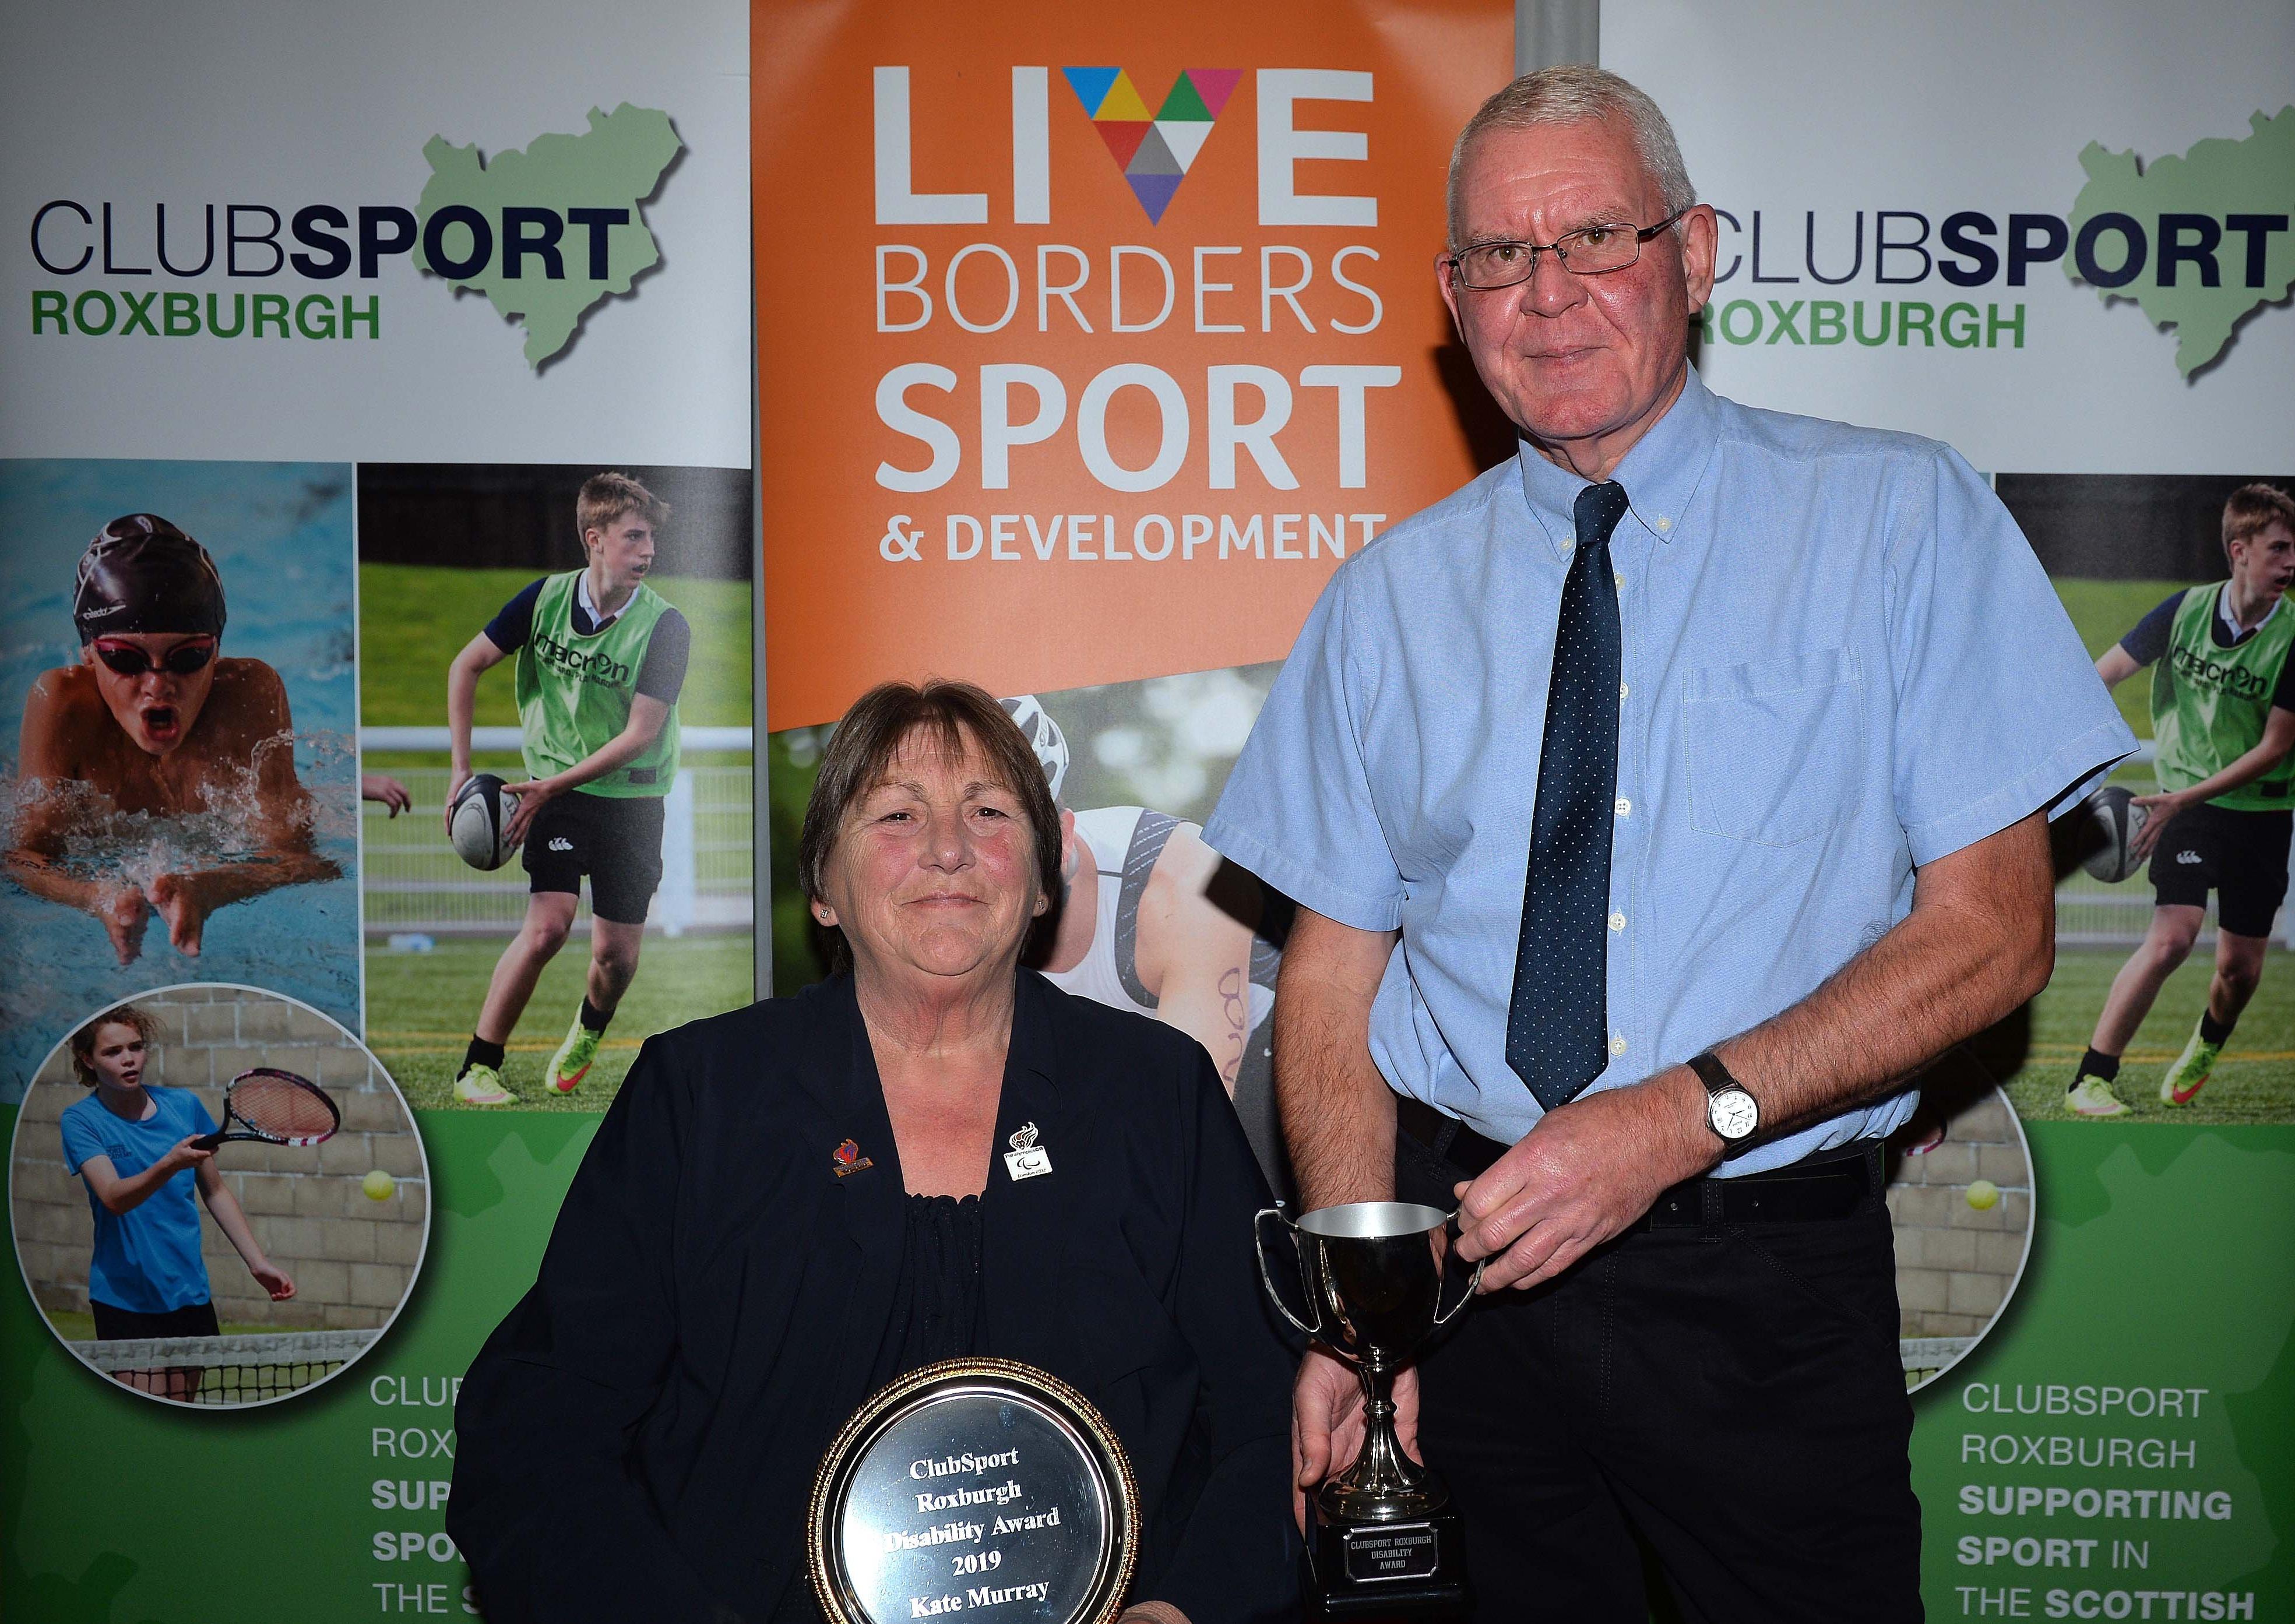 The Disability Award for 2019 went to archery specialist Kate Murray.